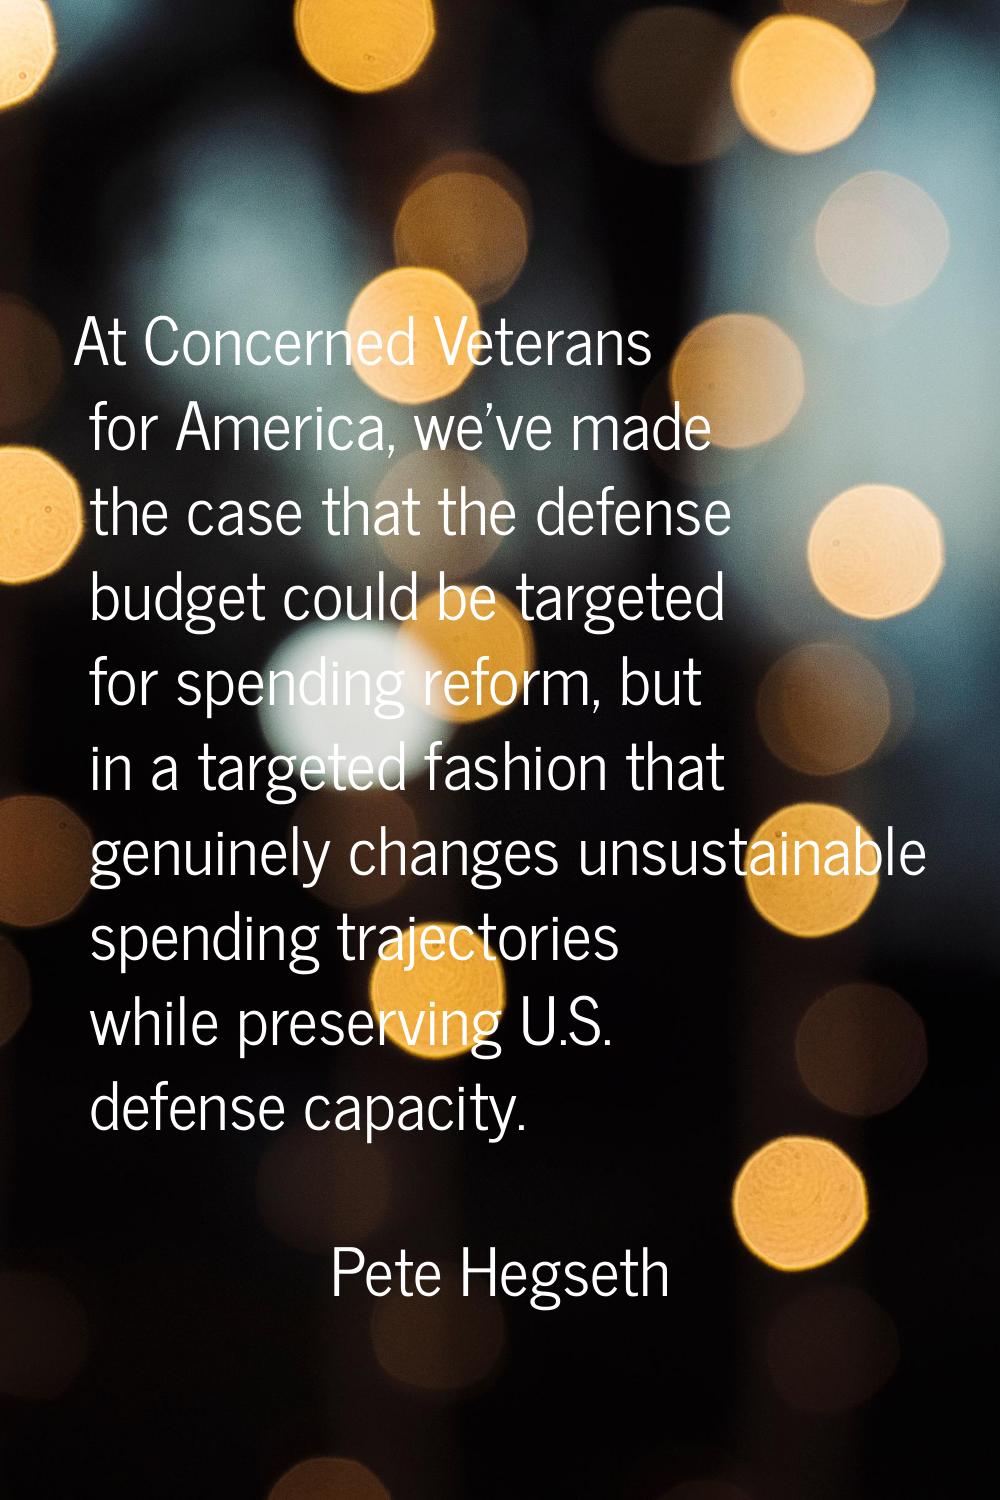 At Concerned Veterans for America, we've made the case that the defense budget could be targeted fo